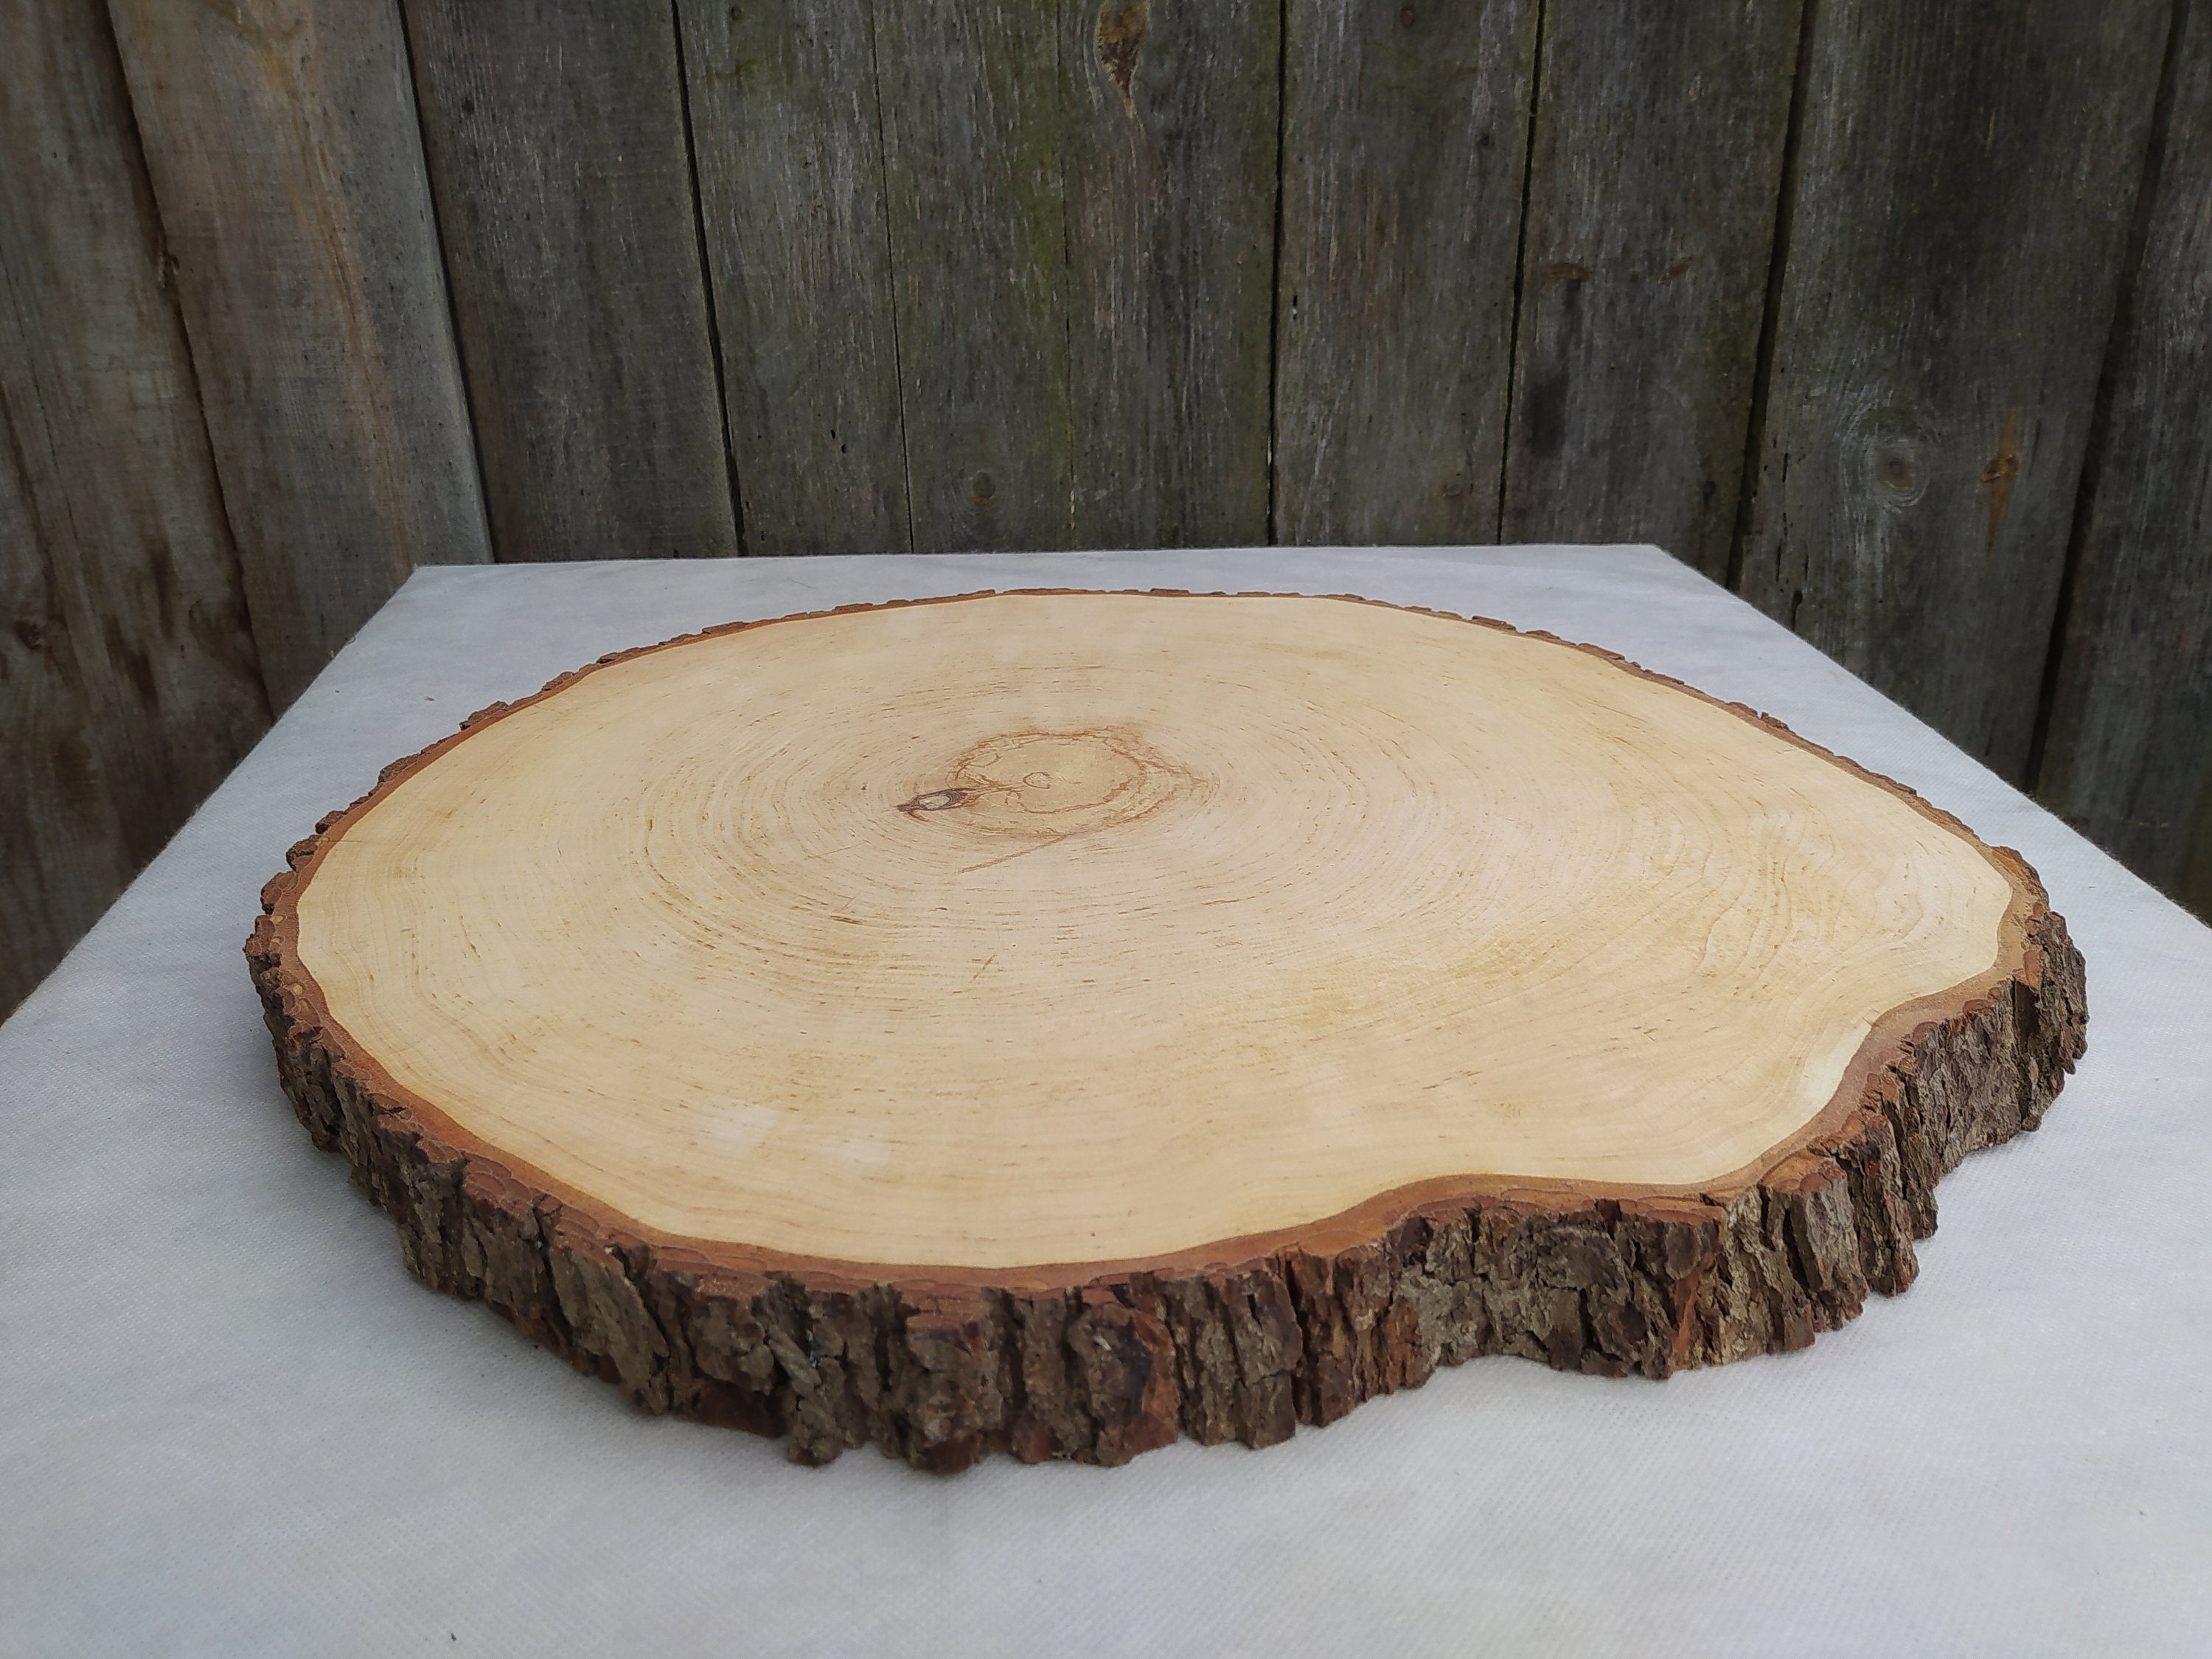 Cracked Natural Wood Slice Rustic Cake Stand, Thick Centerpieces